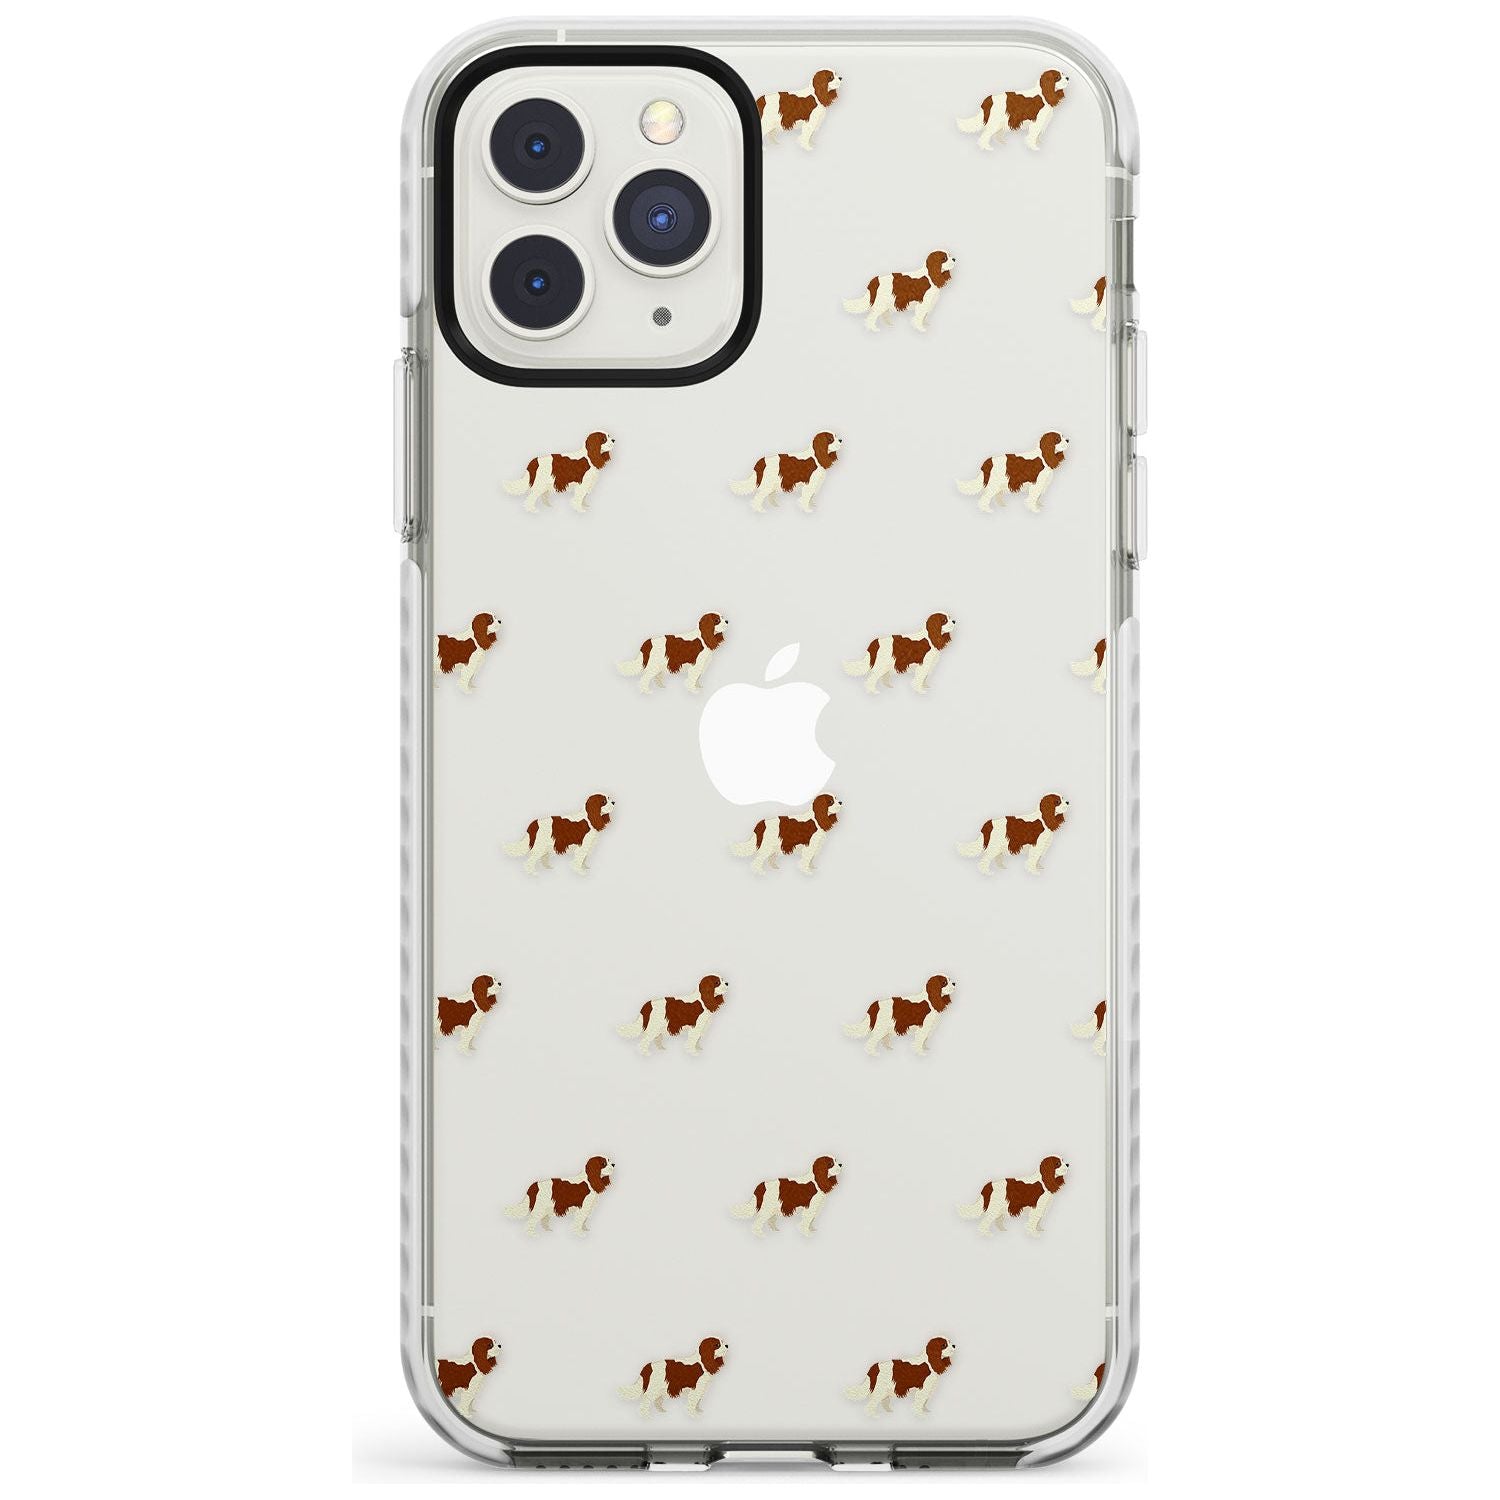 Cavalier King Charles Spaniel Pattern Clear Impact Phone Case for iPhone 11 Pro Max